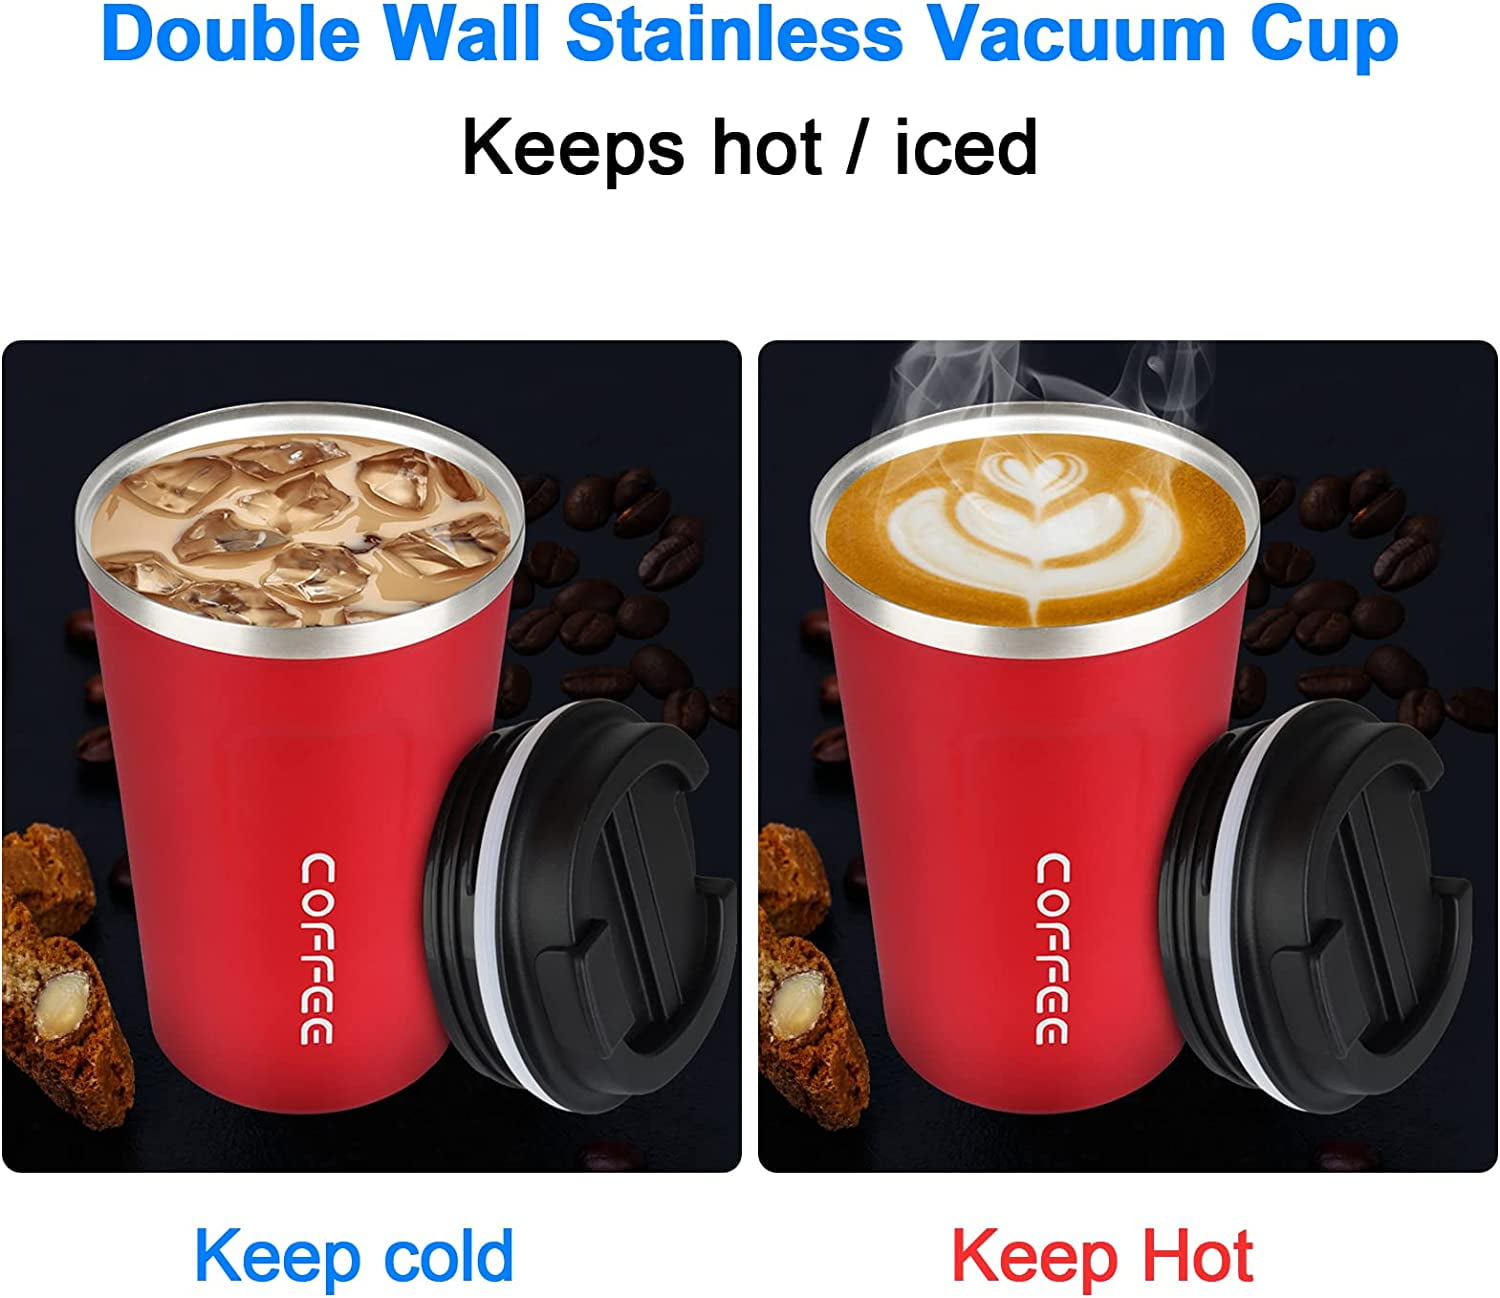 Vacuum Insulated Travel Coffee Mug - THILY 12 oz Stainless Steel Coffee Cup  with Handle, Spill-Proof Lid, Reusable, BPA Free, Keep Iced Coffee Cold,  Black Ripple 